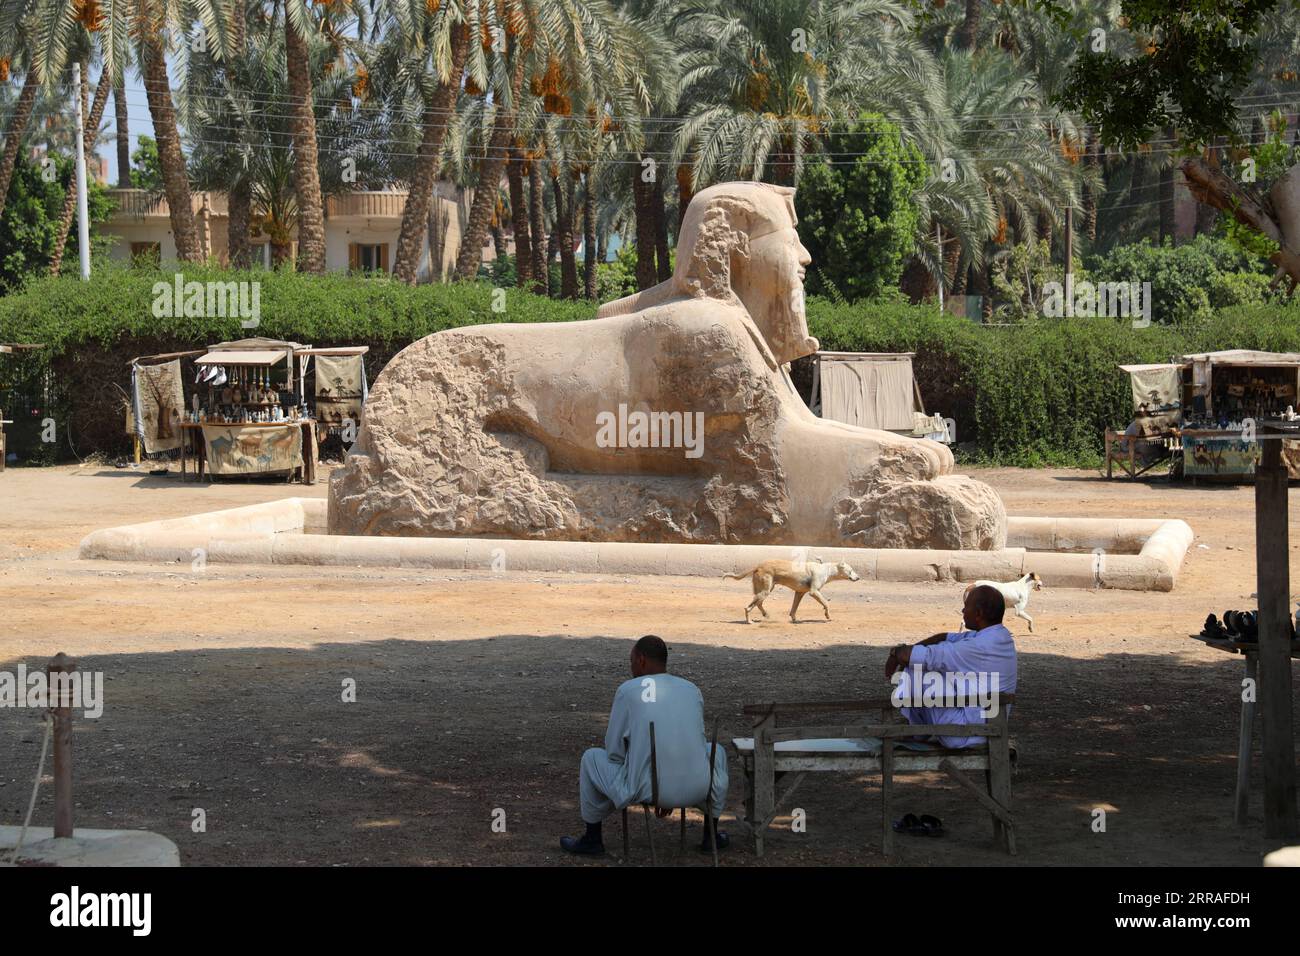 210728 -- CAIRO, July 28, 2021 -- Vendors wait for tourists by the statue of Sphinx at the ruins of ancient Egyptian city of Memphis, around 23 kilometers southwest to Cairo, capital of Egypt, July 28, 2021. Memphis, founded around 3,100 BC, was the capital of ancient Egypt during the Old Kingdom spanning from 2700-2200 BC and remained an important city throughout ancient Egyptian history. Today, the ruins of the former capital offer fragmented evidence of its past. Together with its necropolis the pyramid fields from Giza to Dahshur, Memphis was inscribed as a World Heritage Site in 1979. The Stock Photo